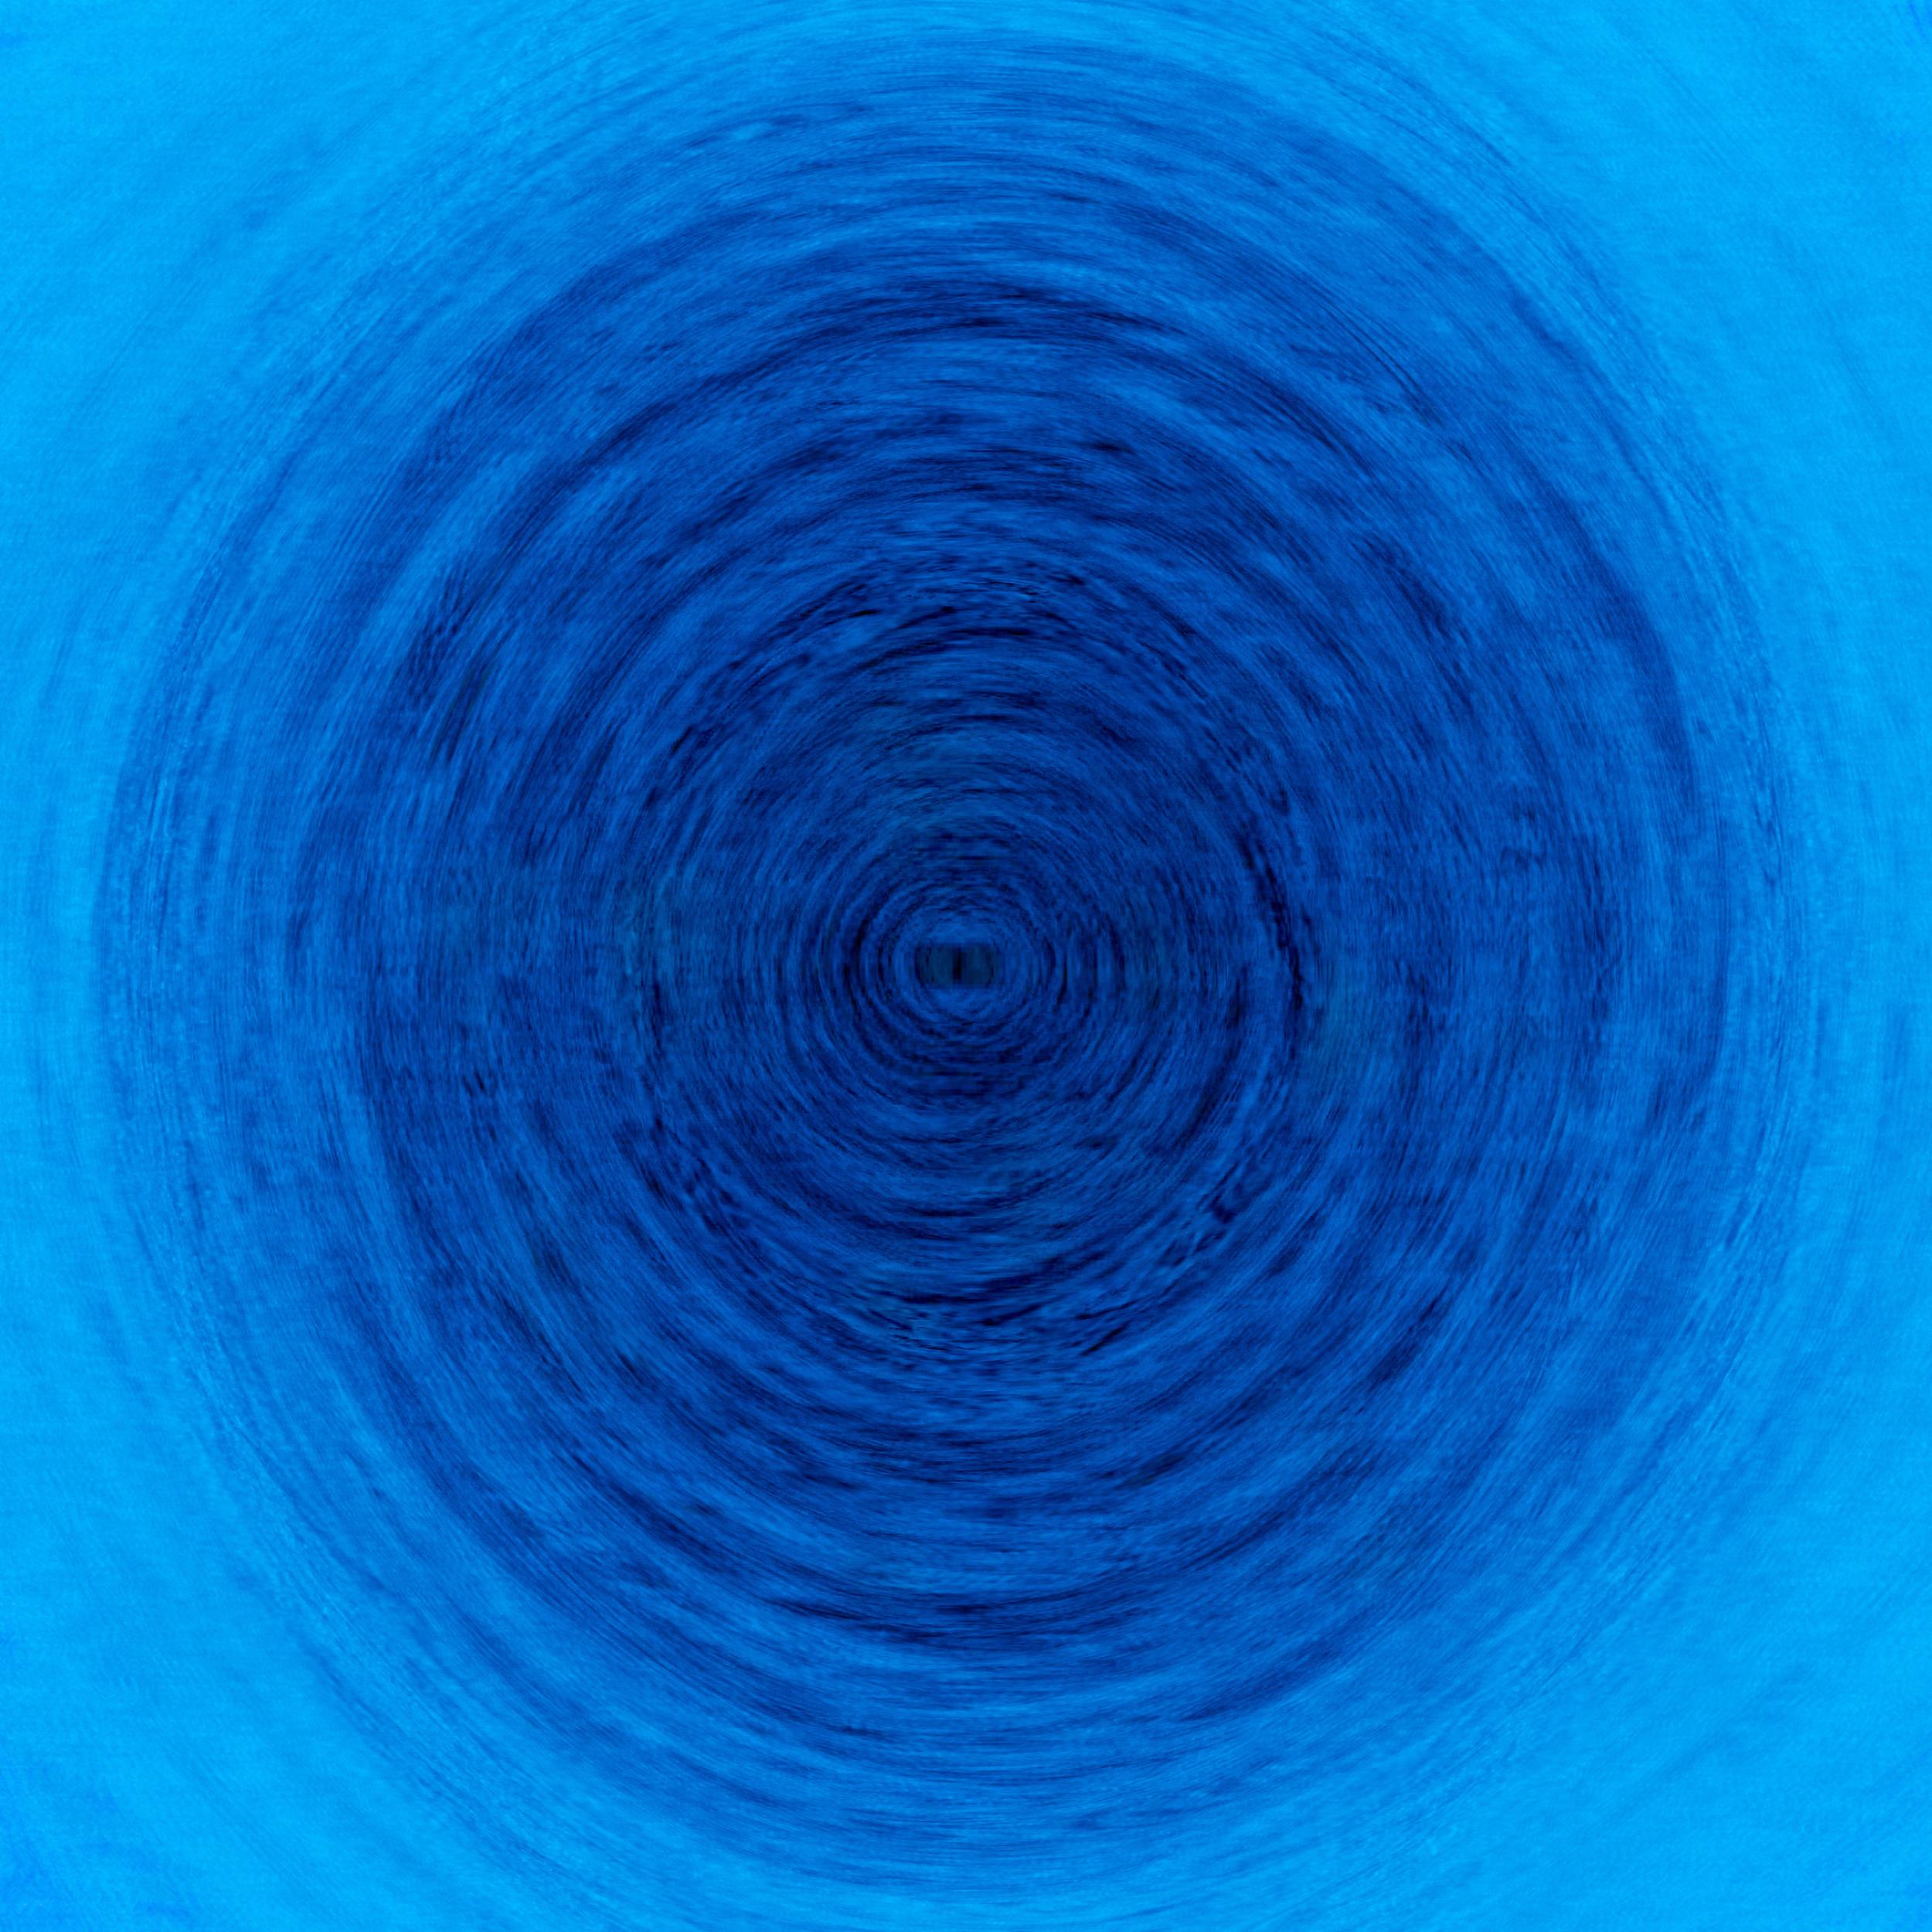 Sungyong Hong Abstract Painting - Heuristic #02 [Blue, Sky, 3D, Lenticular, New media, Circle, Galaxy, Space]